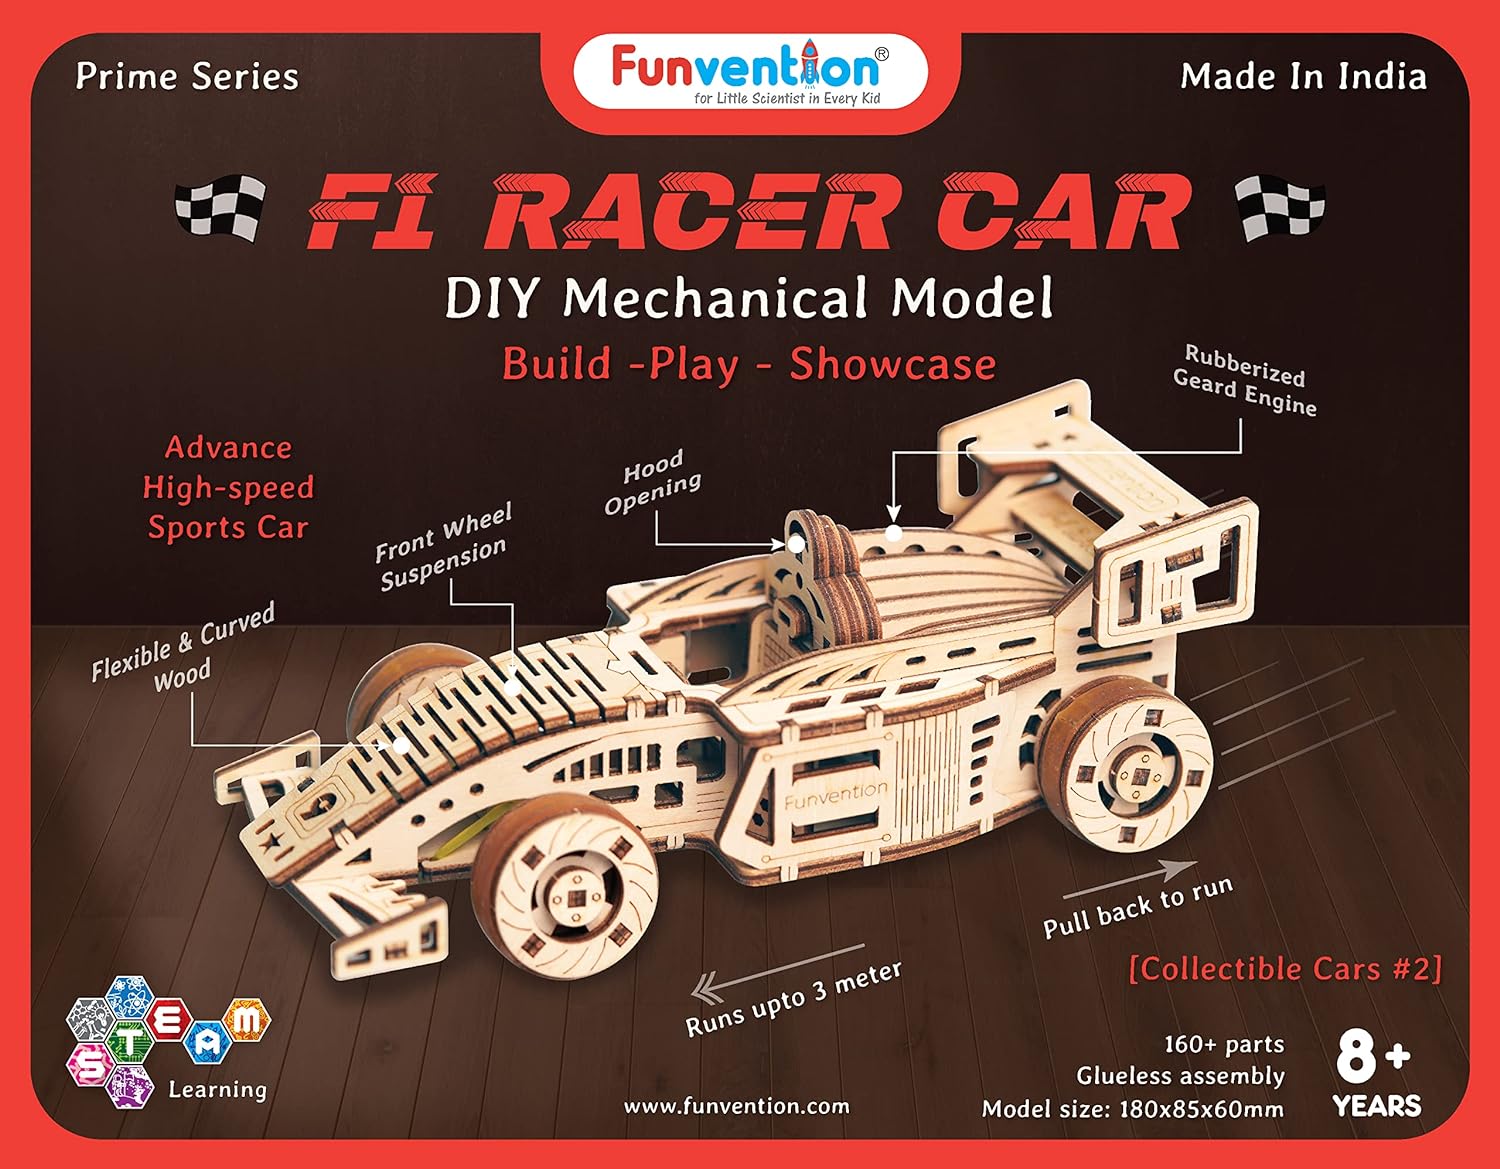 Funvention- for Little Scientist in Every Kid FUNVENTION F1 Racer Car - DIY Functional Mechanical Model 3D Puzzle STEM Lerning Kit Collectible Cars Building Kit with Working Wheels & Shocks Pack of 1